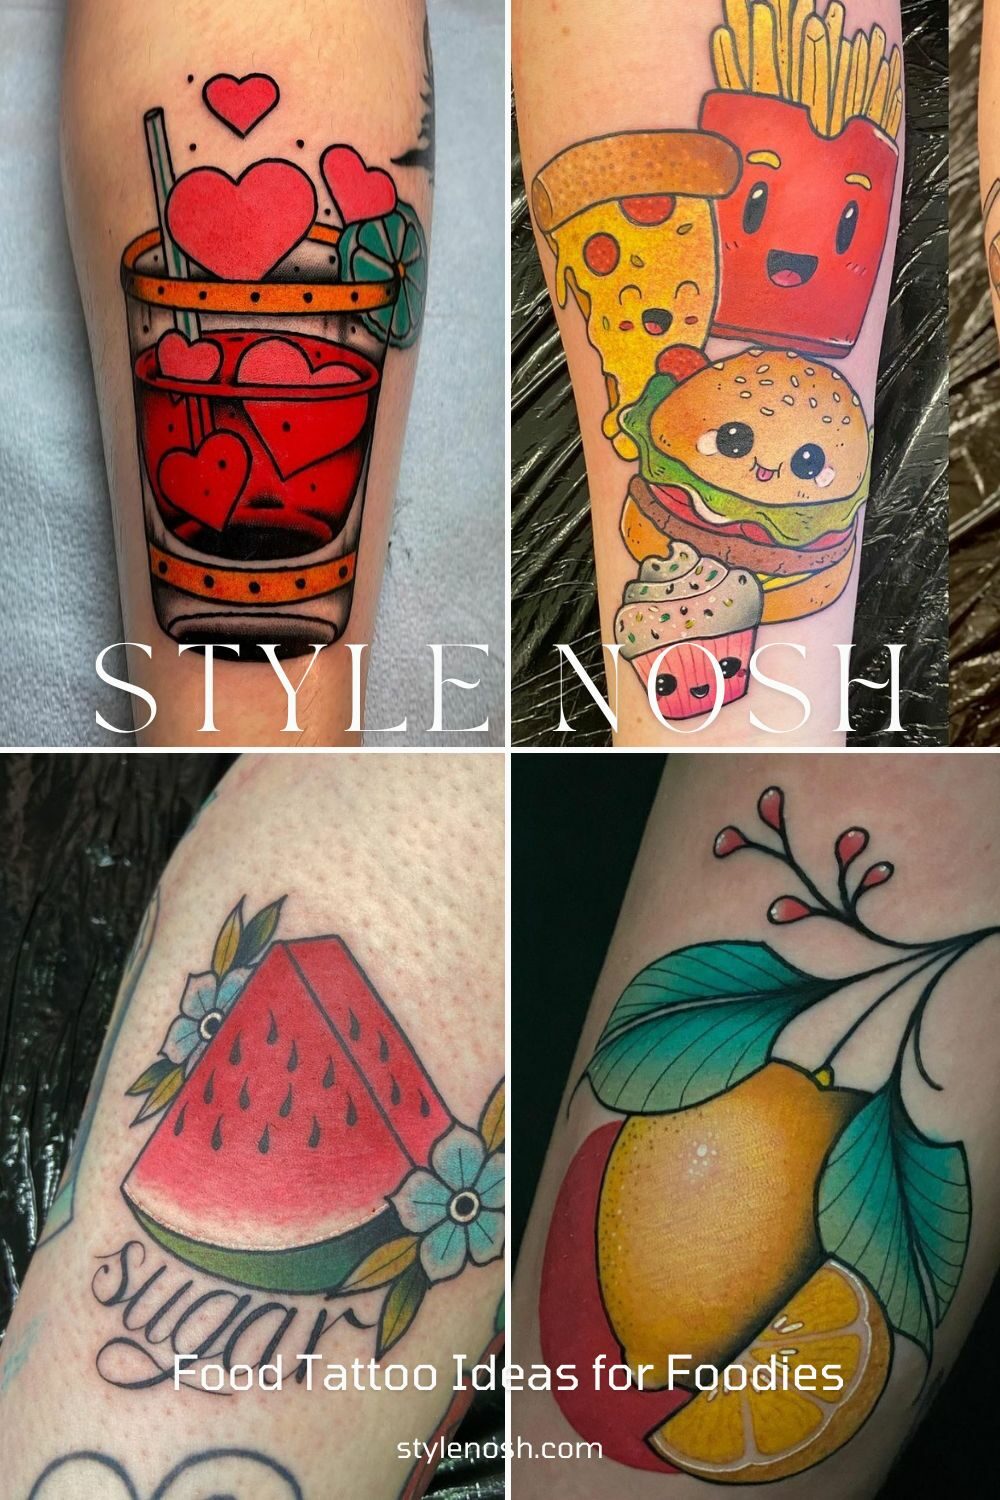 Best idea for food tattoos that is both simple and sophisticated